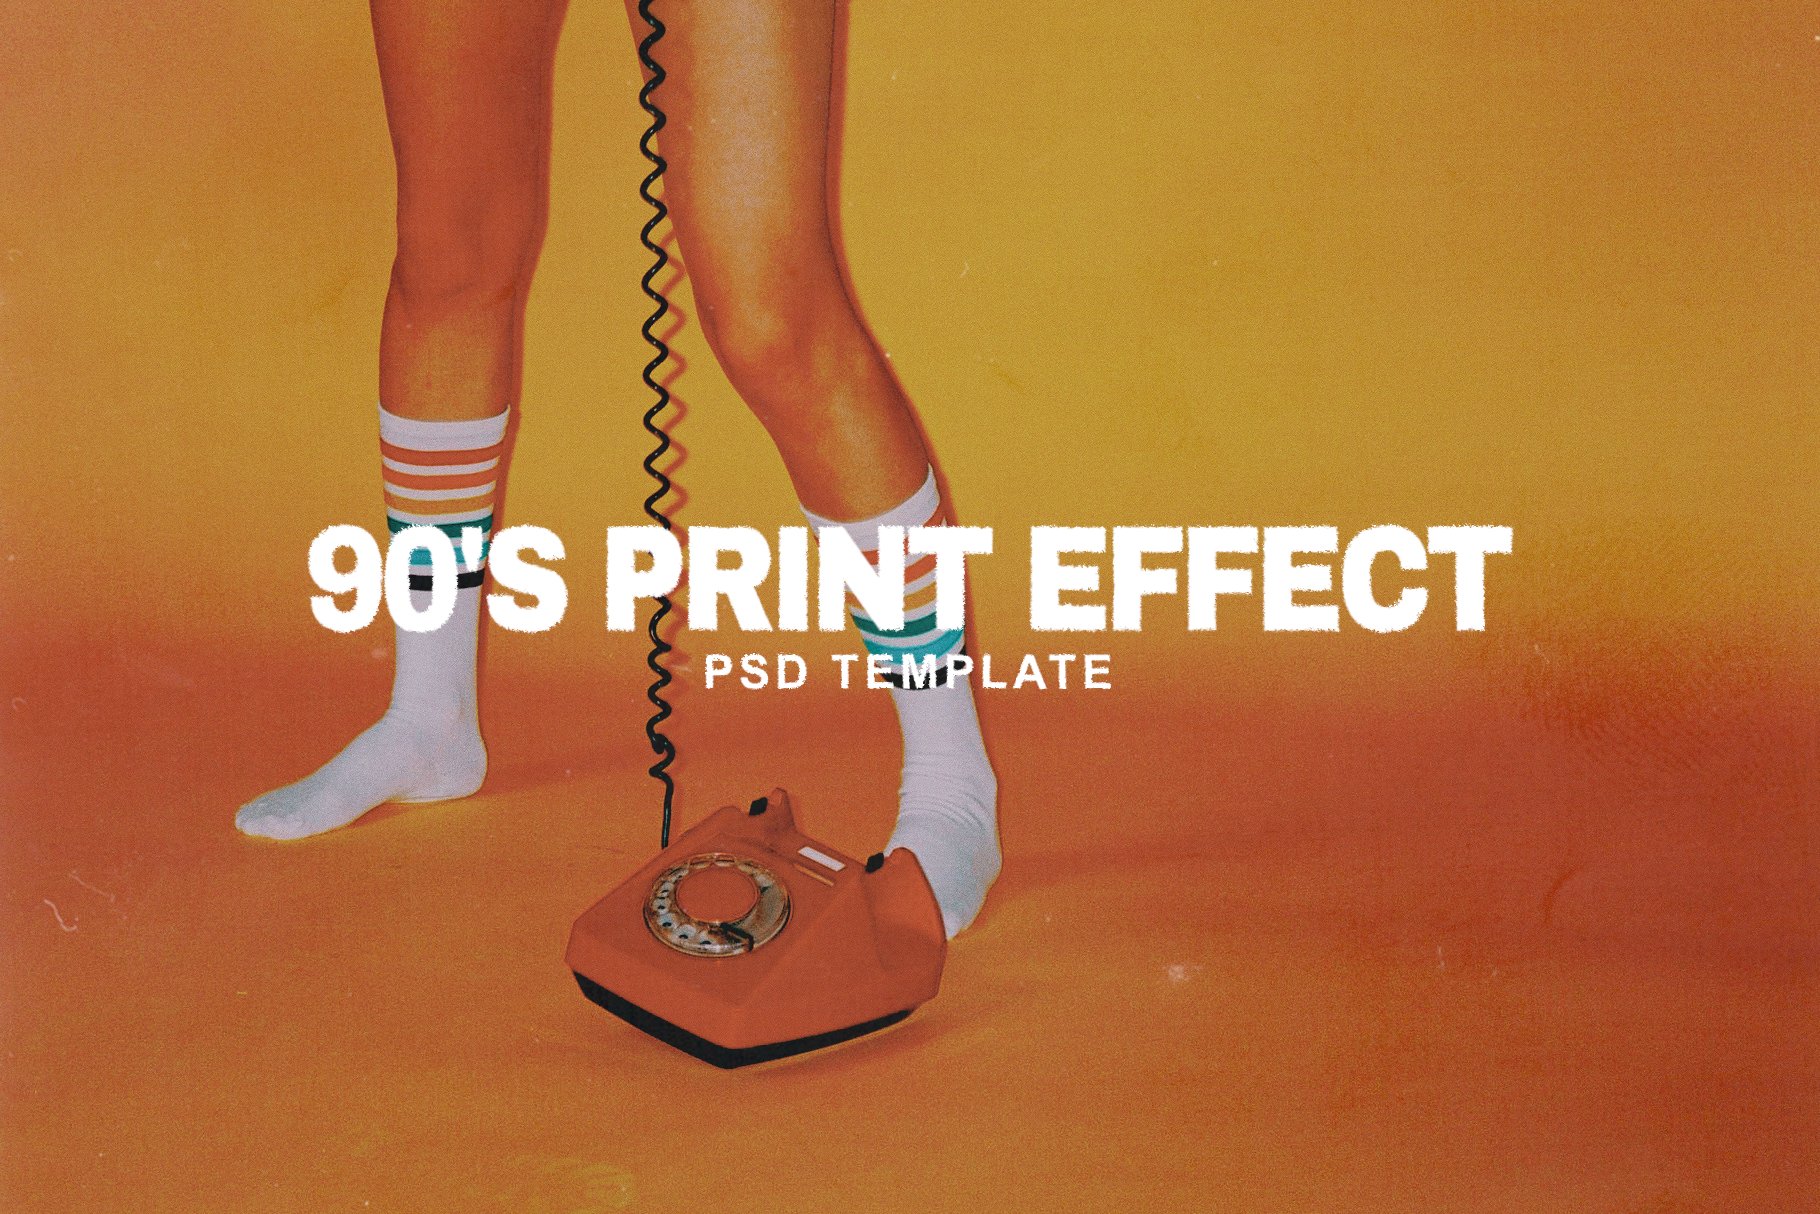 90s Print Effectcover image.